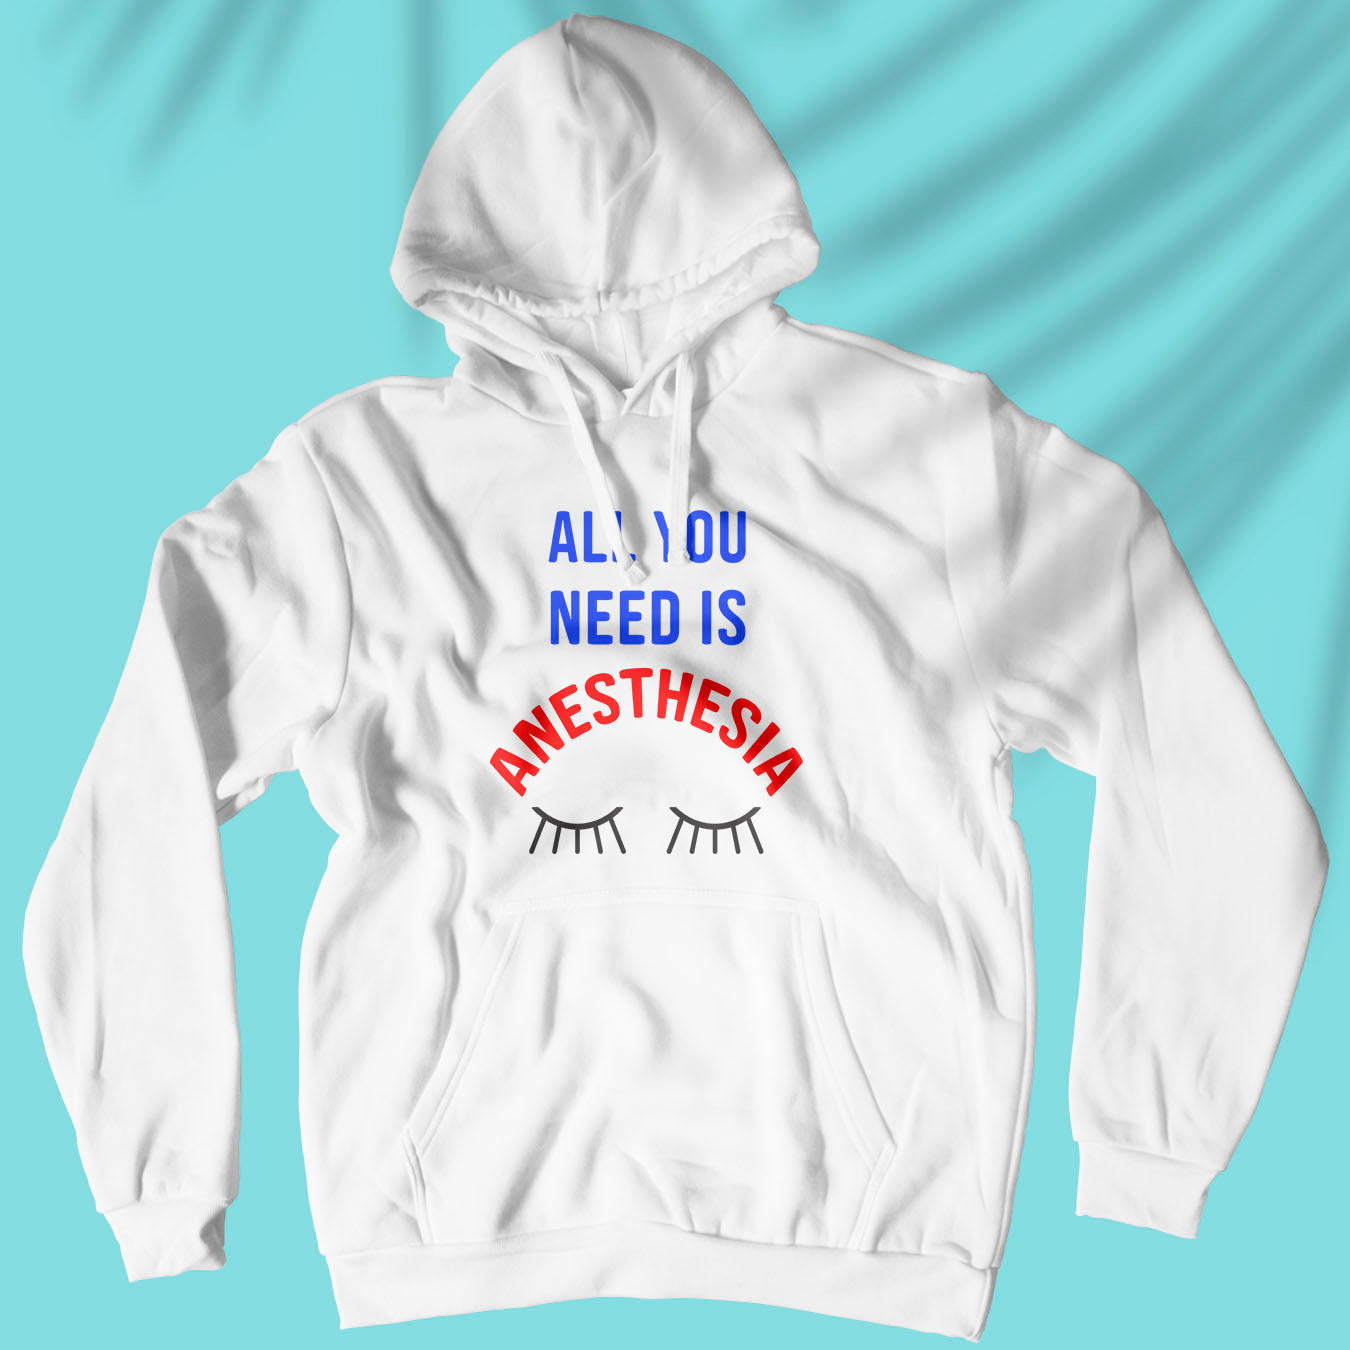 All You Need Is Anesthesia - Unisex Hoodie